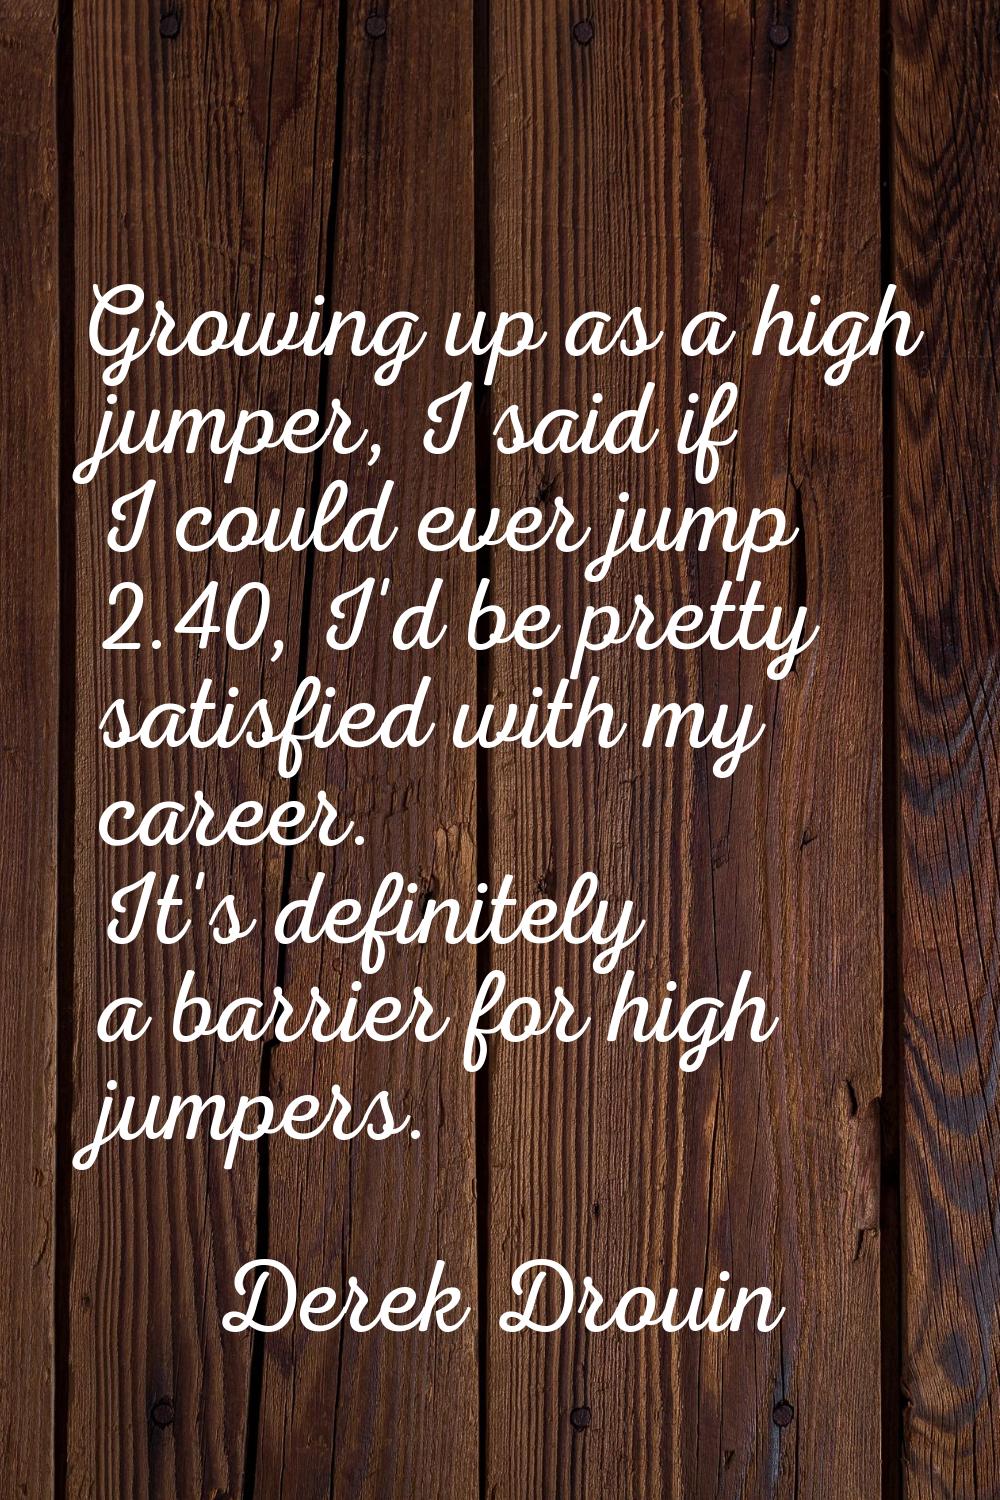 Growing up as a high jumper, I said if I could ever jump 2.40, I'd be pretty satisfied with my care